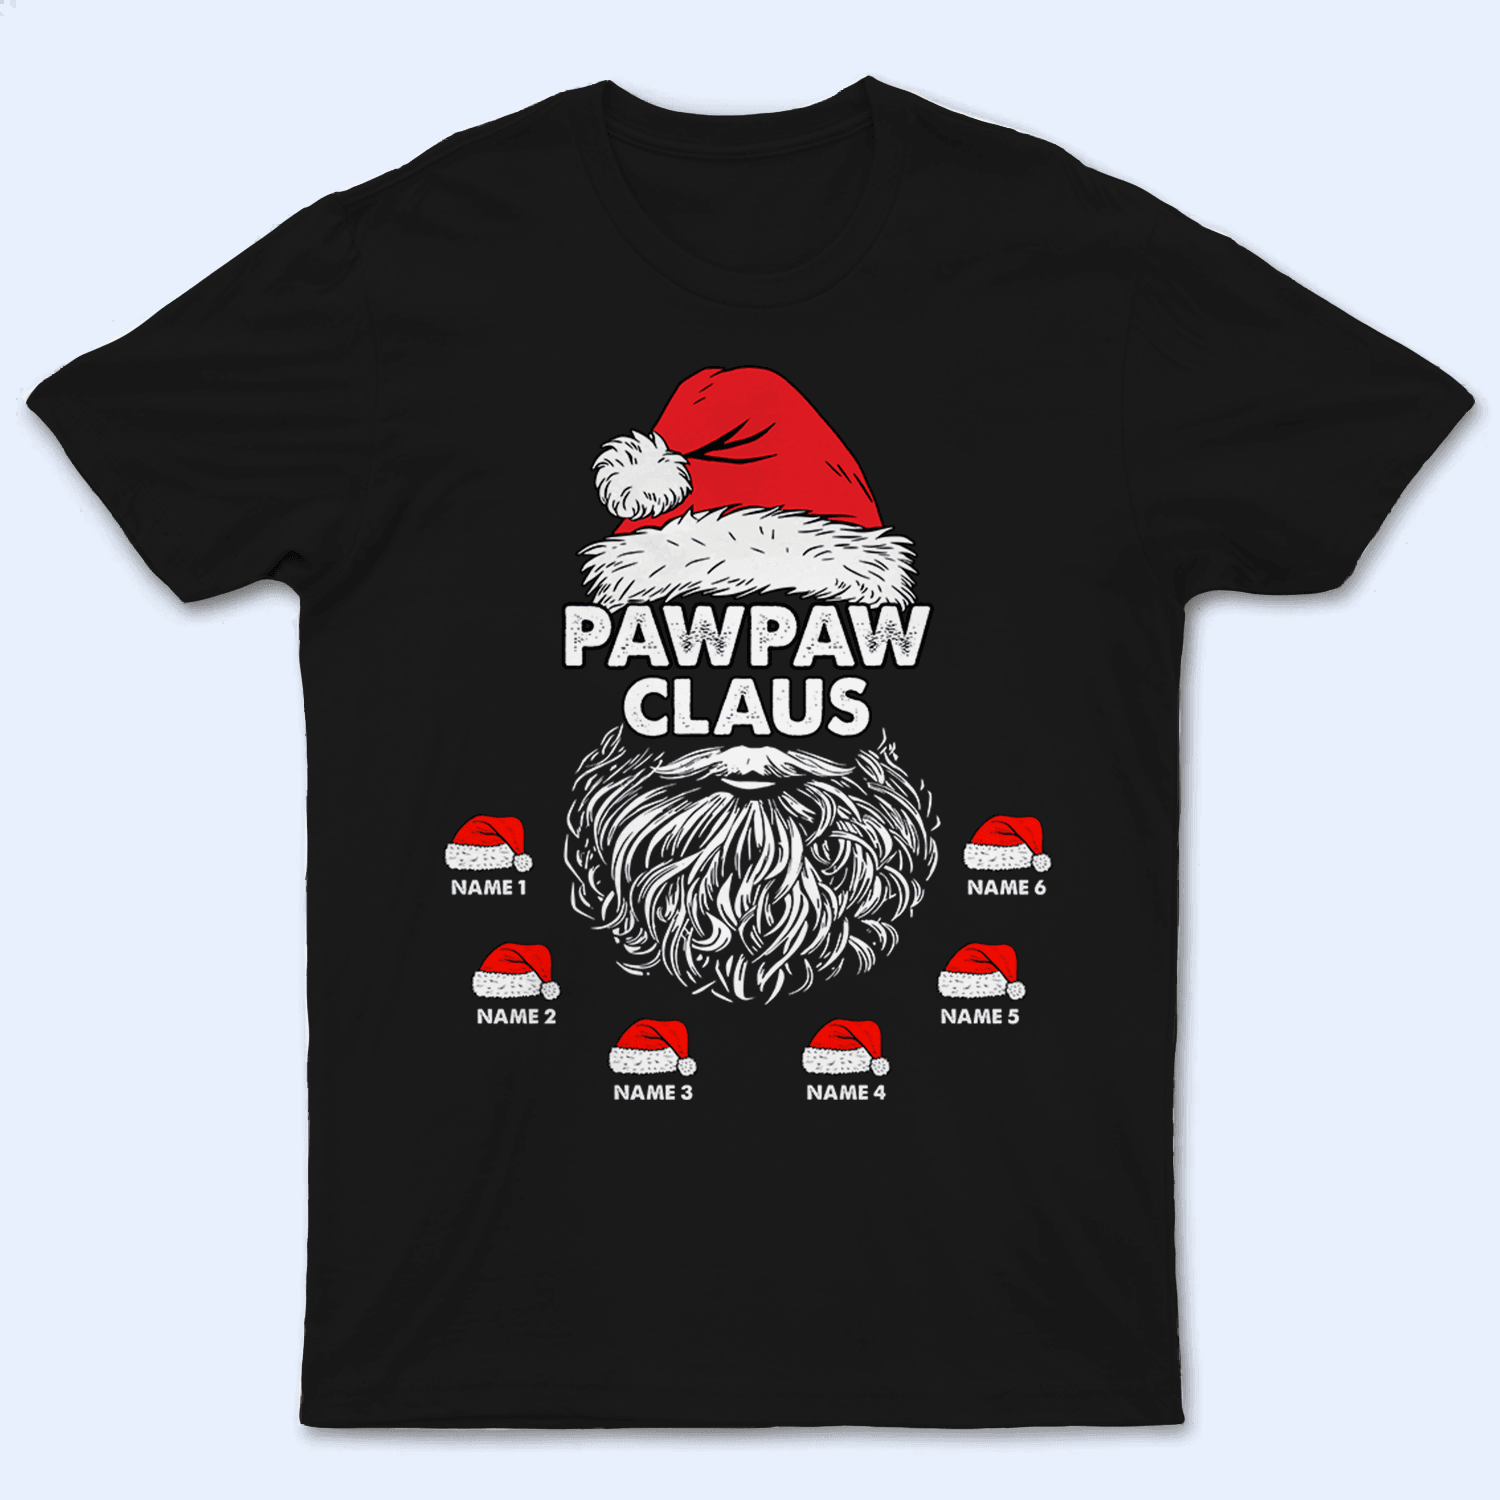 Grandpa Claus Christmas - Personalized Custom T Shirt - Birthday, Loving, Funny Gift for Grandfather/Dad/Father, Husband, Grandparent - Suzitee Store